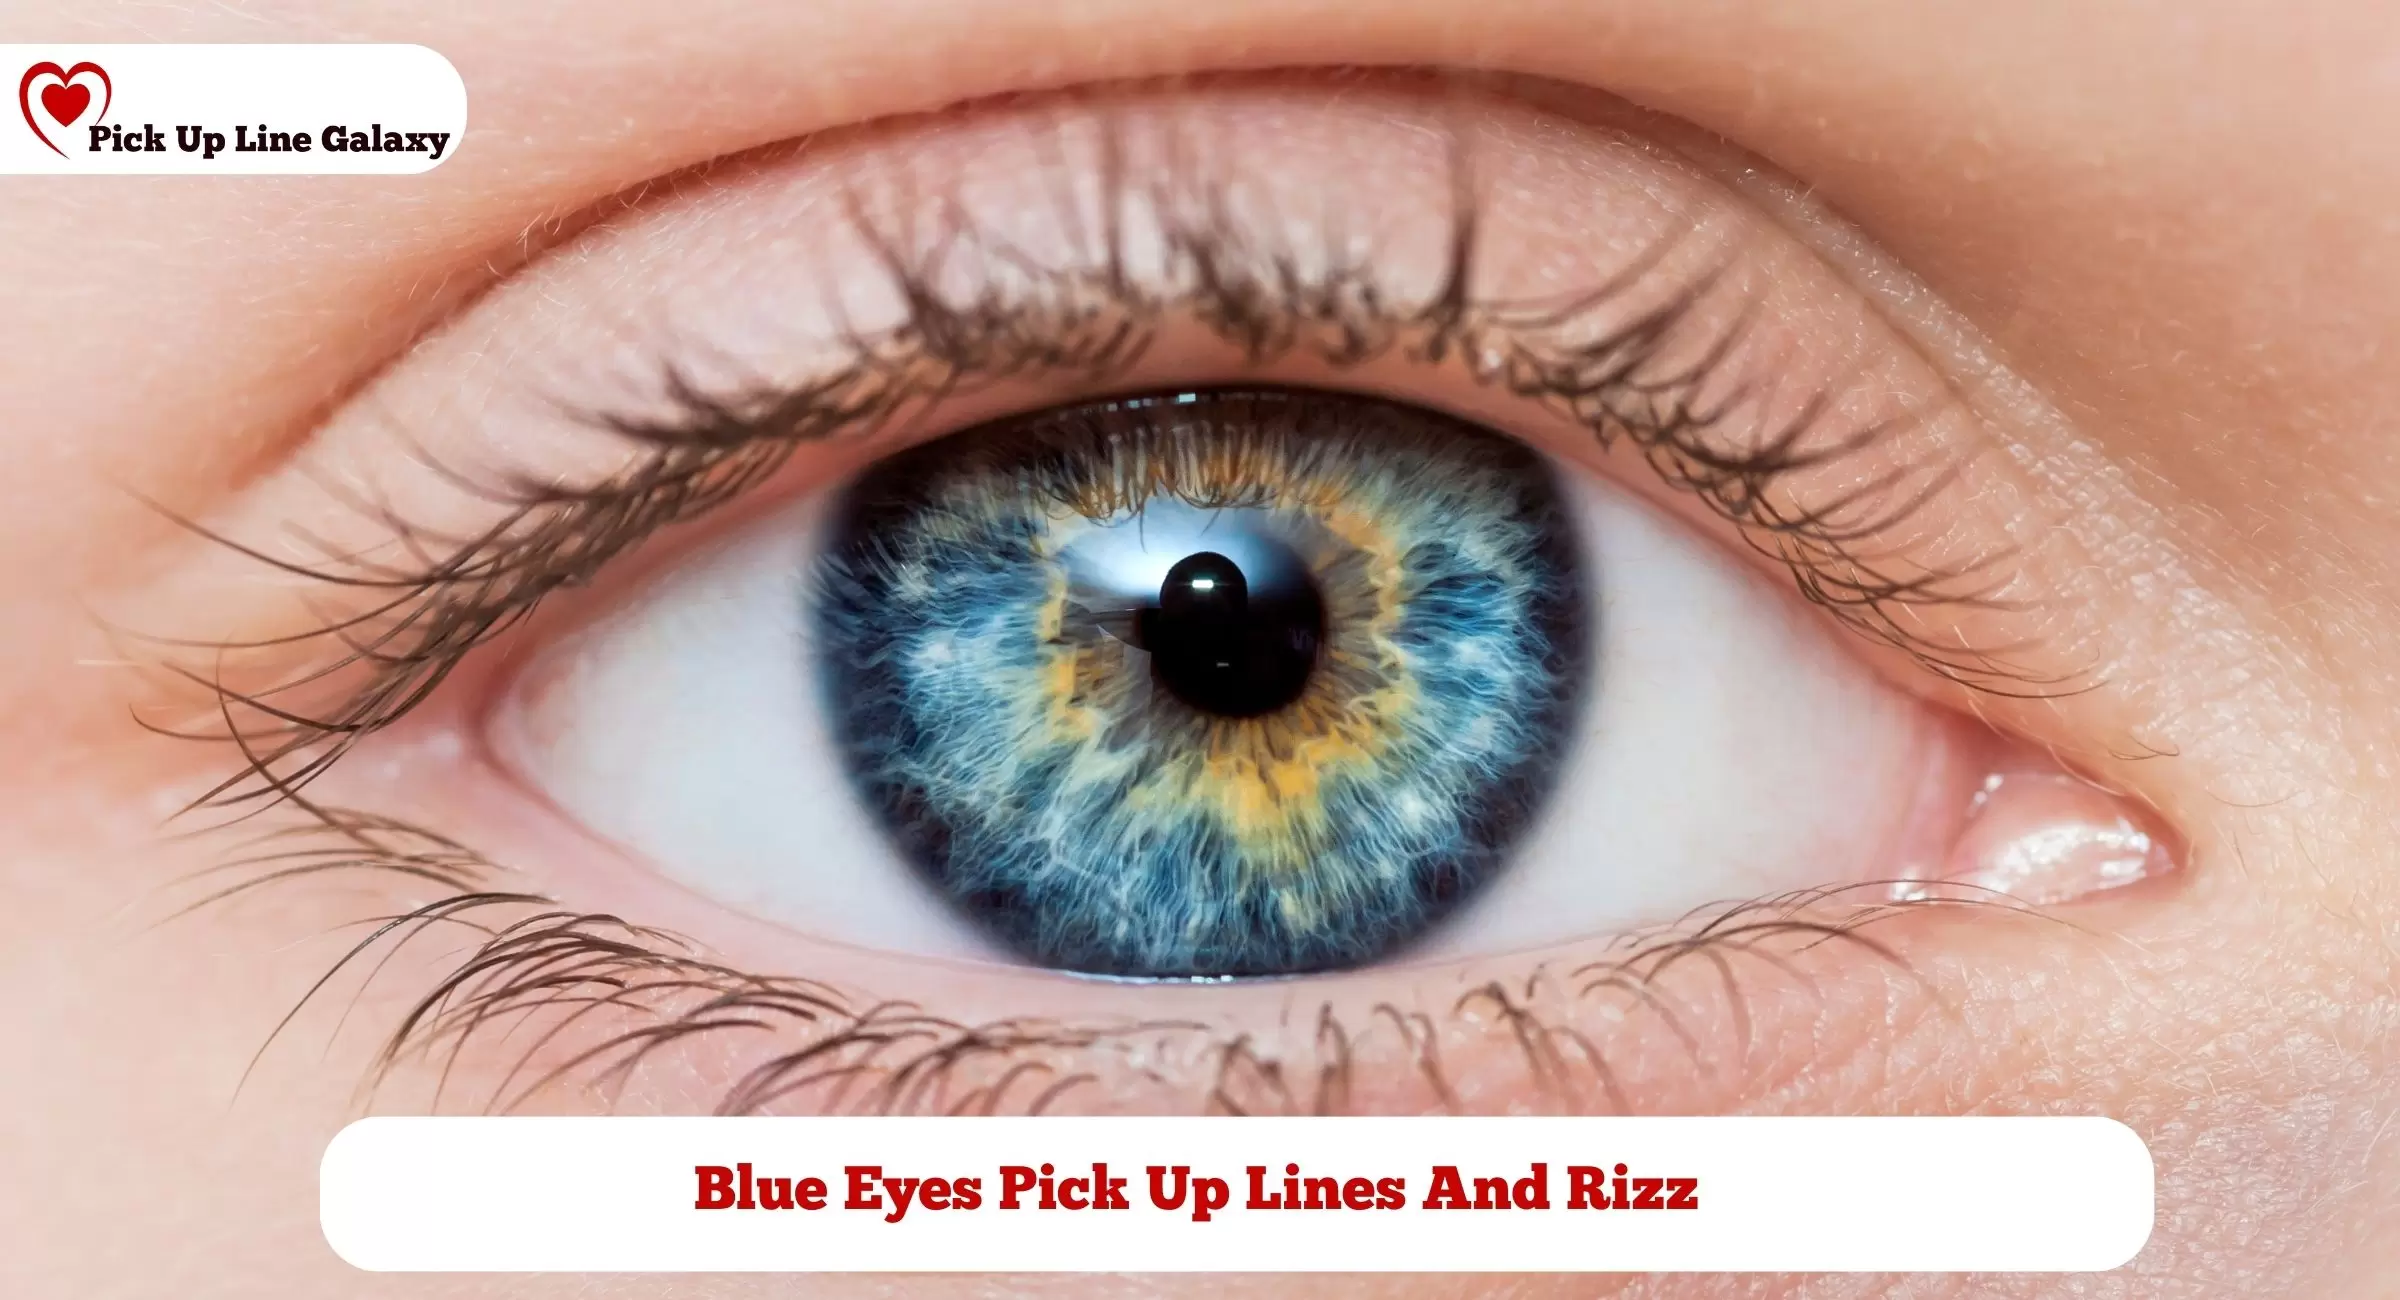 Blue Eyes Pick Up Lines And Rizz